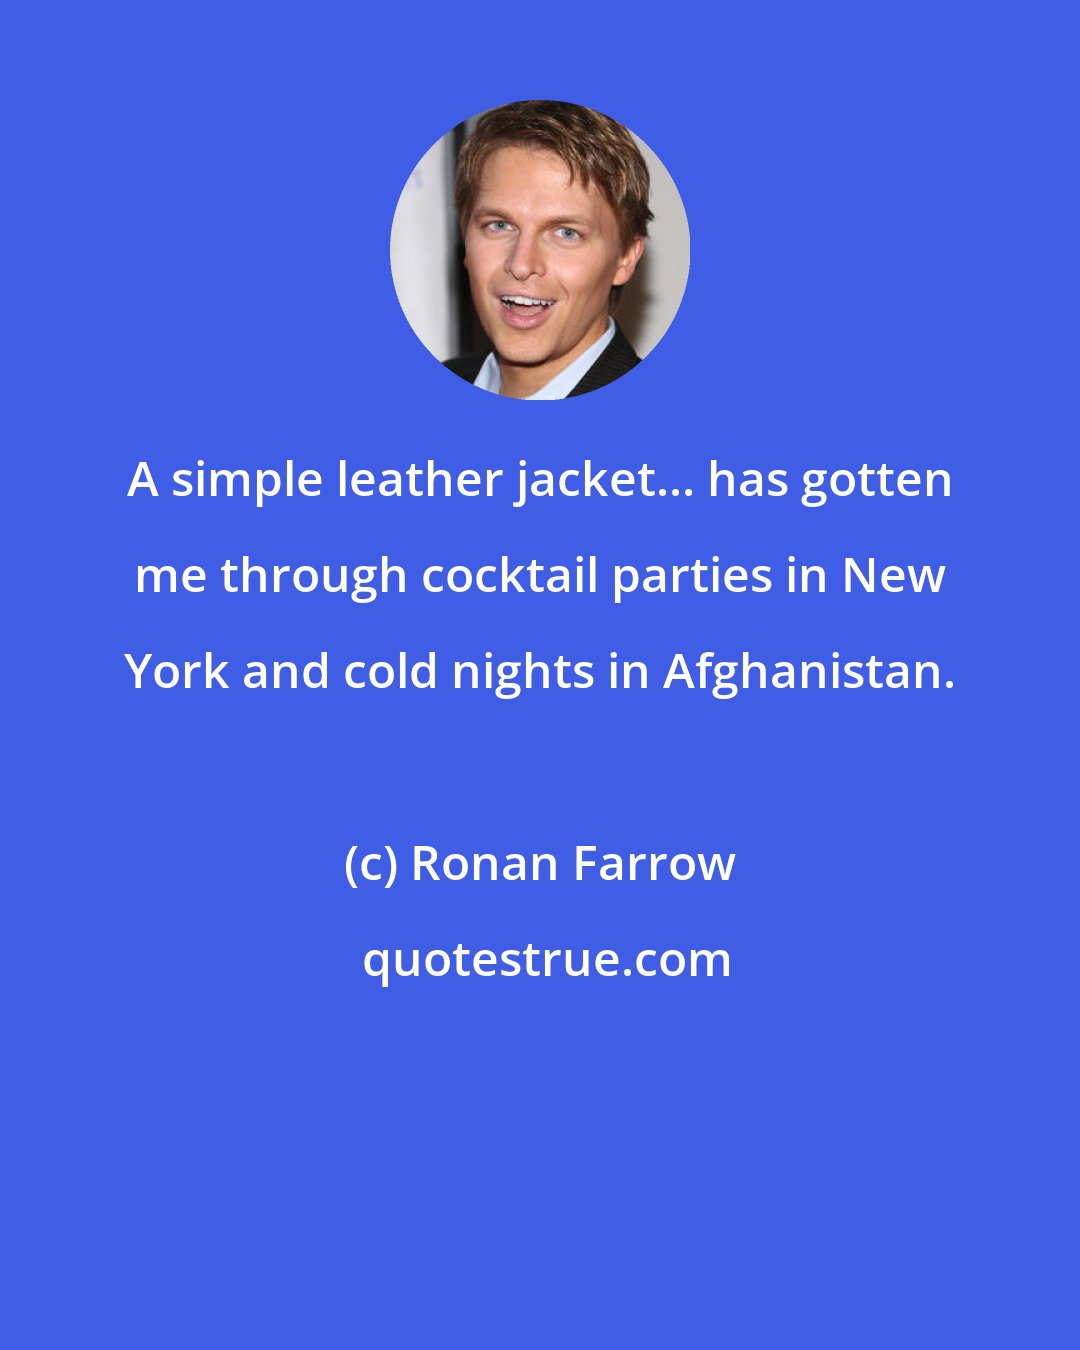 Ronan Farrow: A simple leather jacket... has gotten me through cocktail parties in New York and cold nights in Afghanistan.